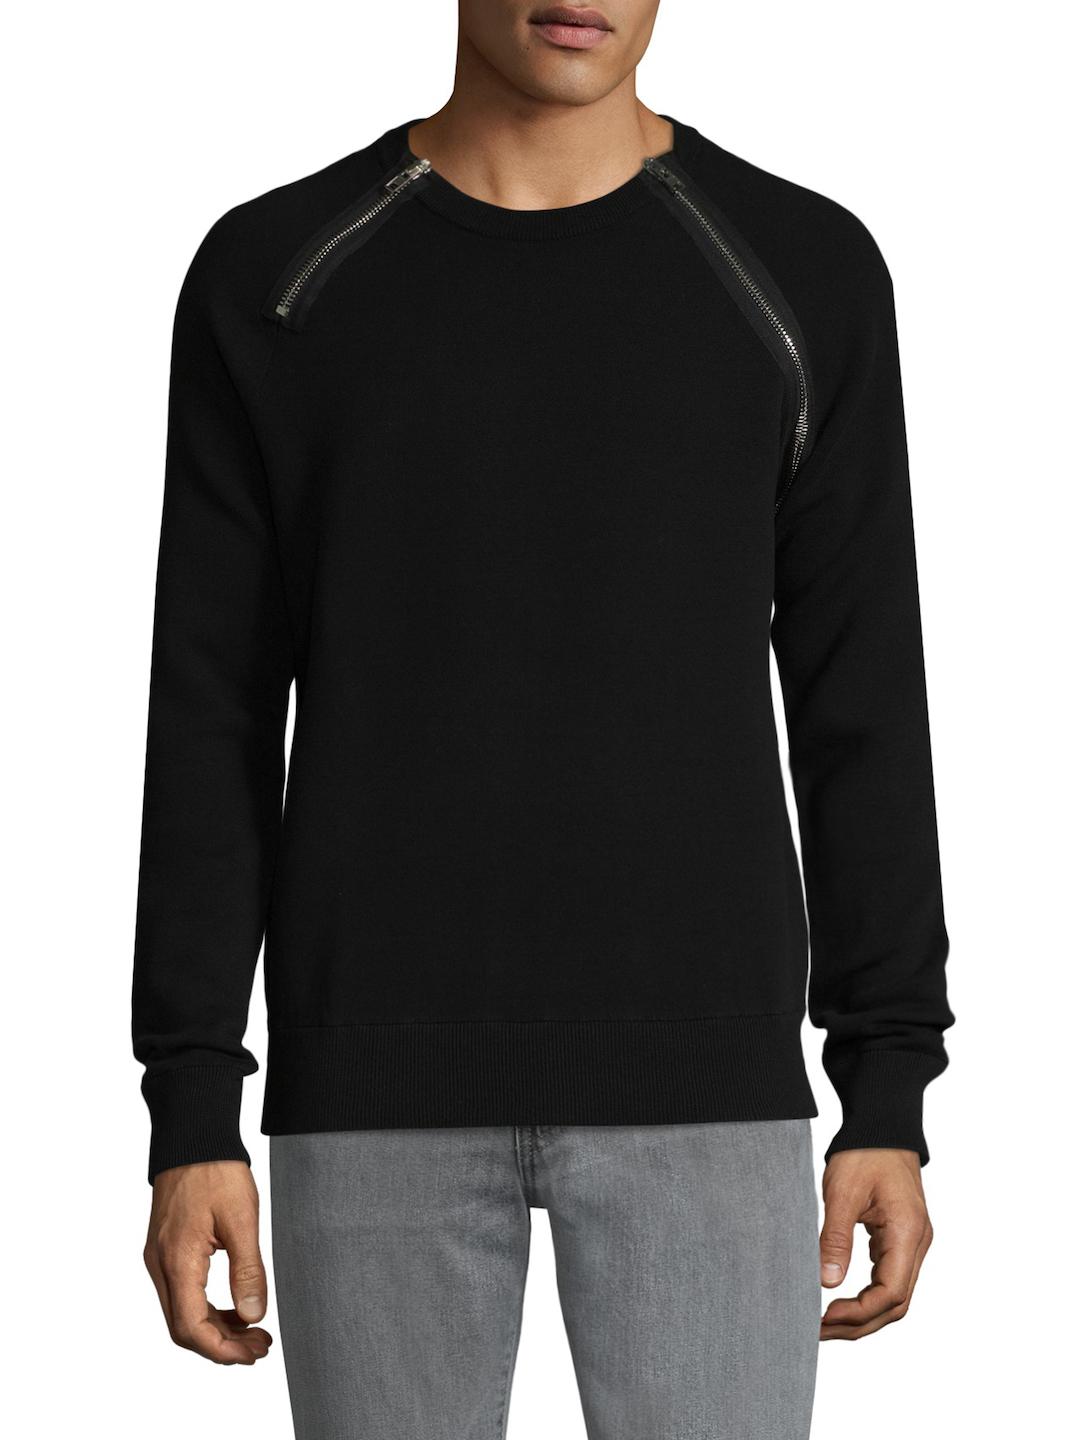 Givenchy Zip Accented Sweater in Black 